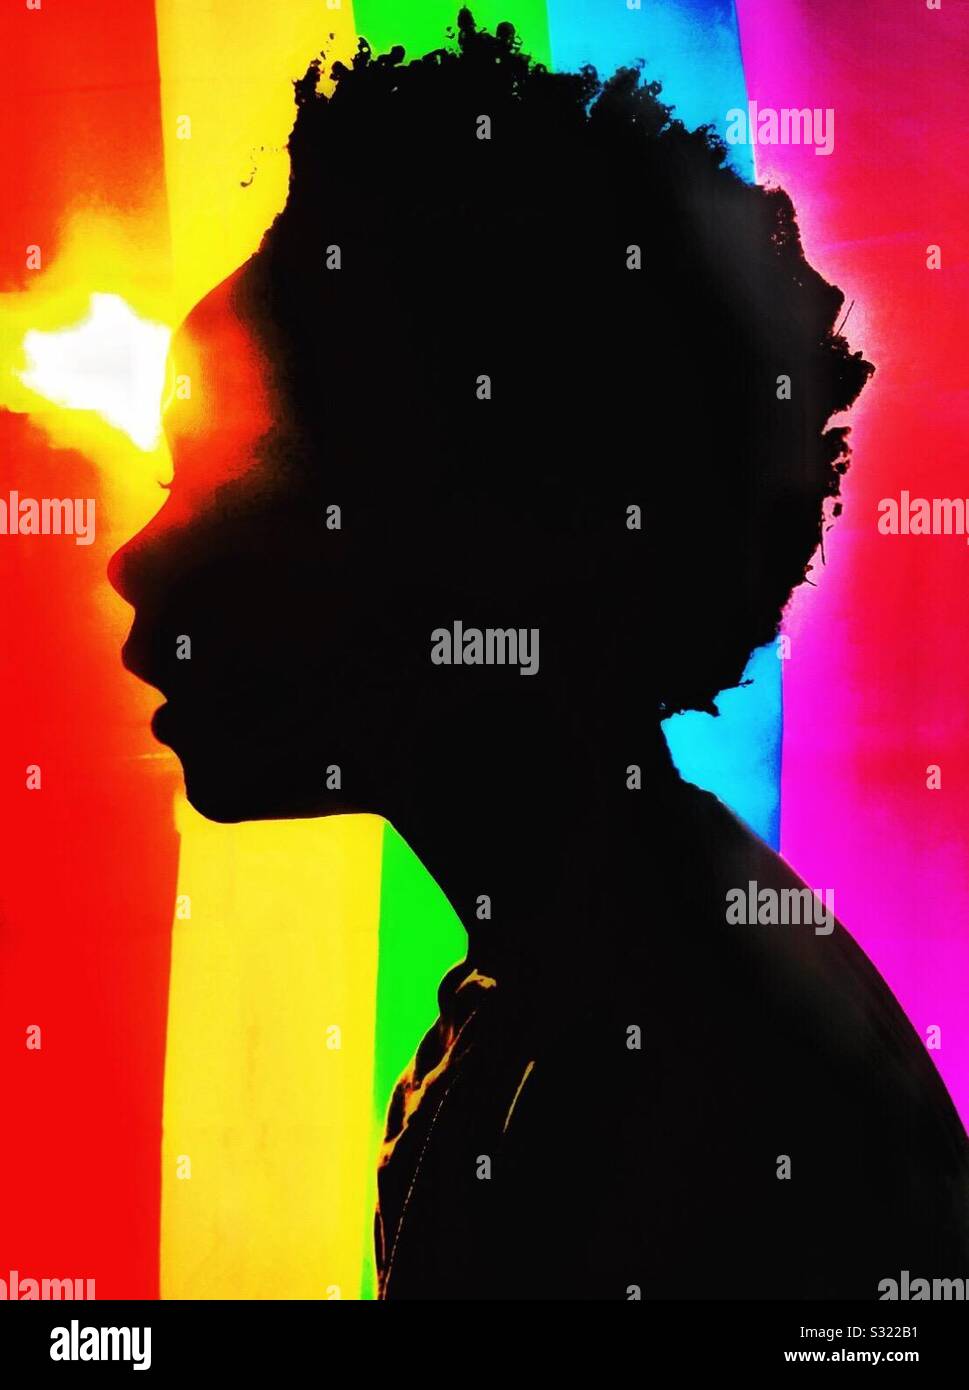 Silhouette of a child and a rainbow flag. Stock Photo